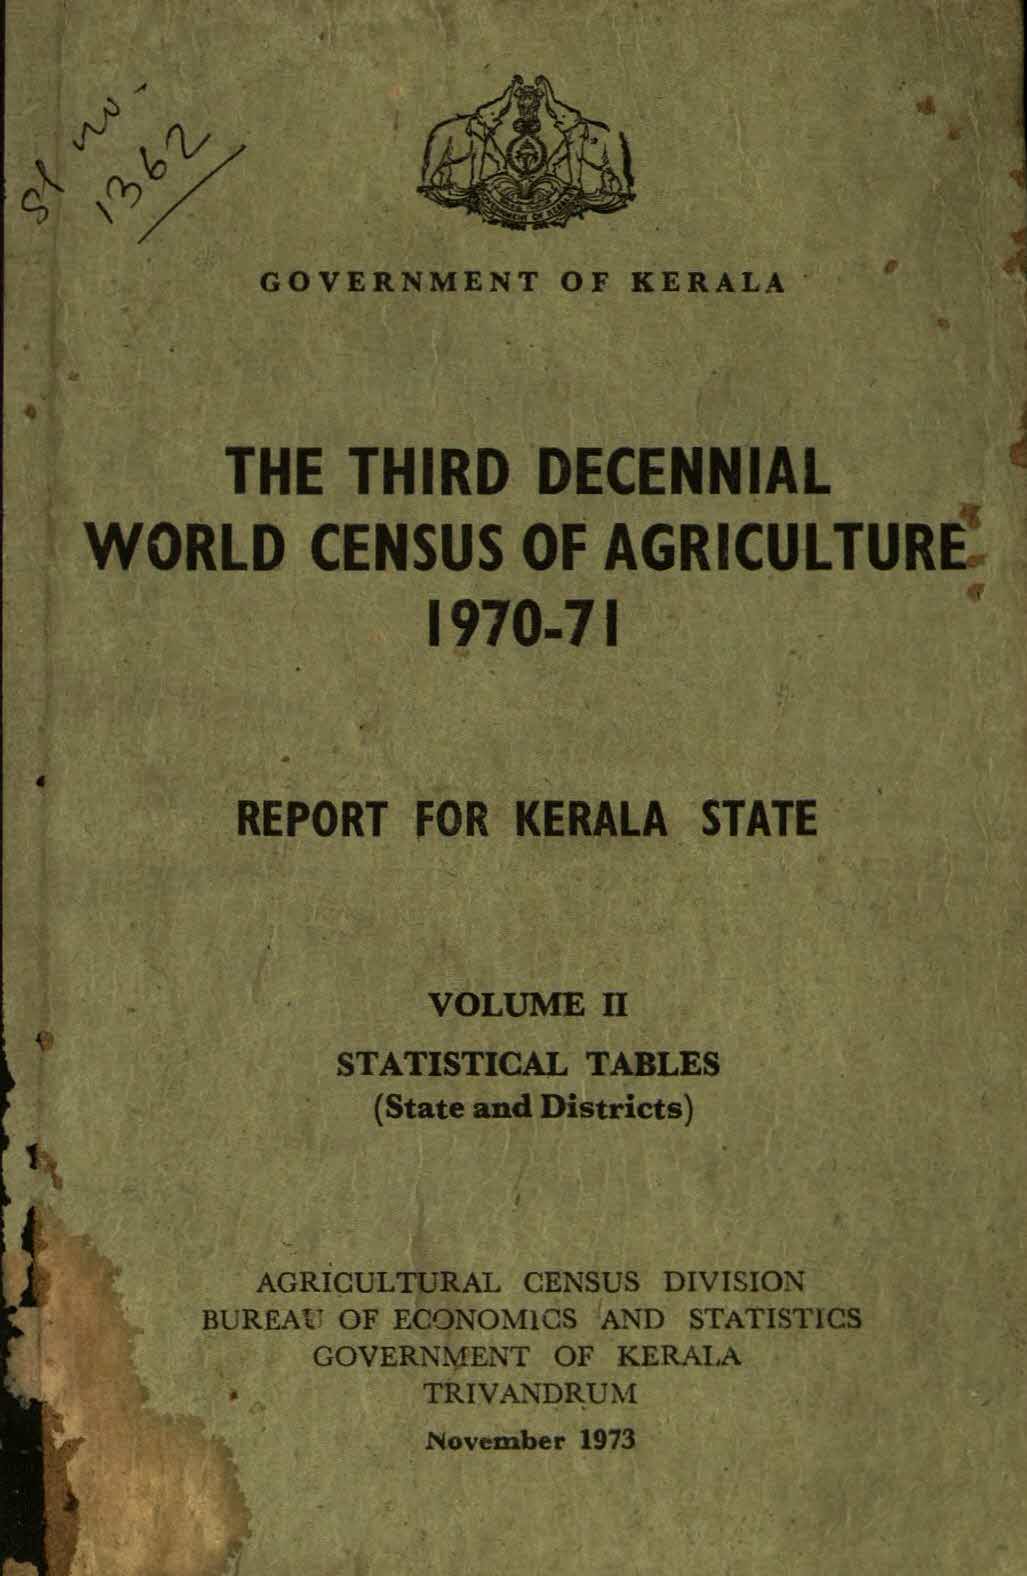 THE THIRD DECENNIAL WORLD CENSUS OF AGRICULTURE 1970-71